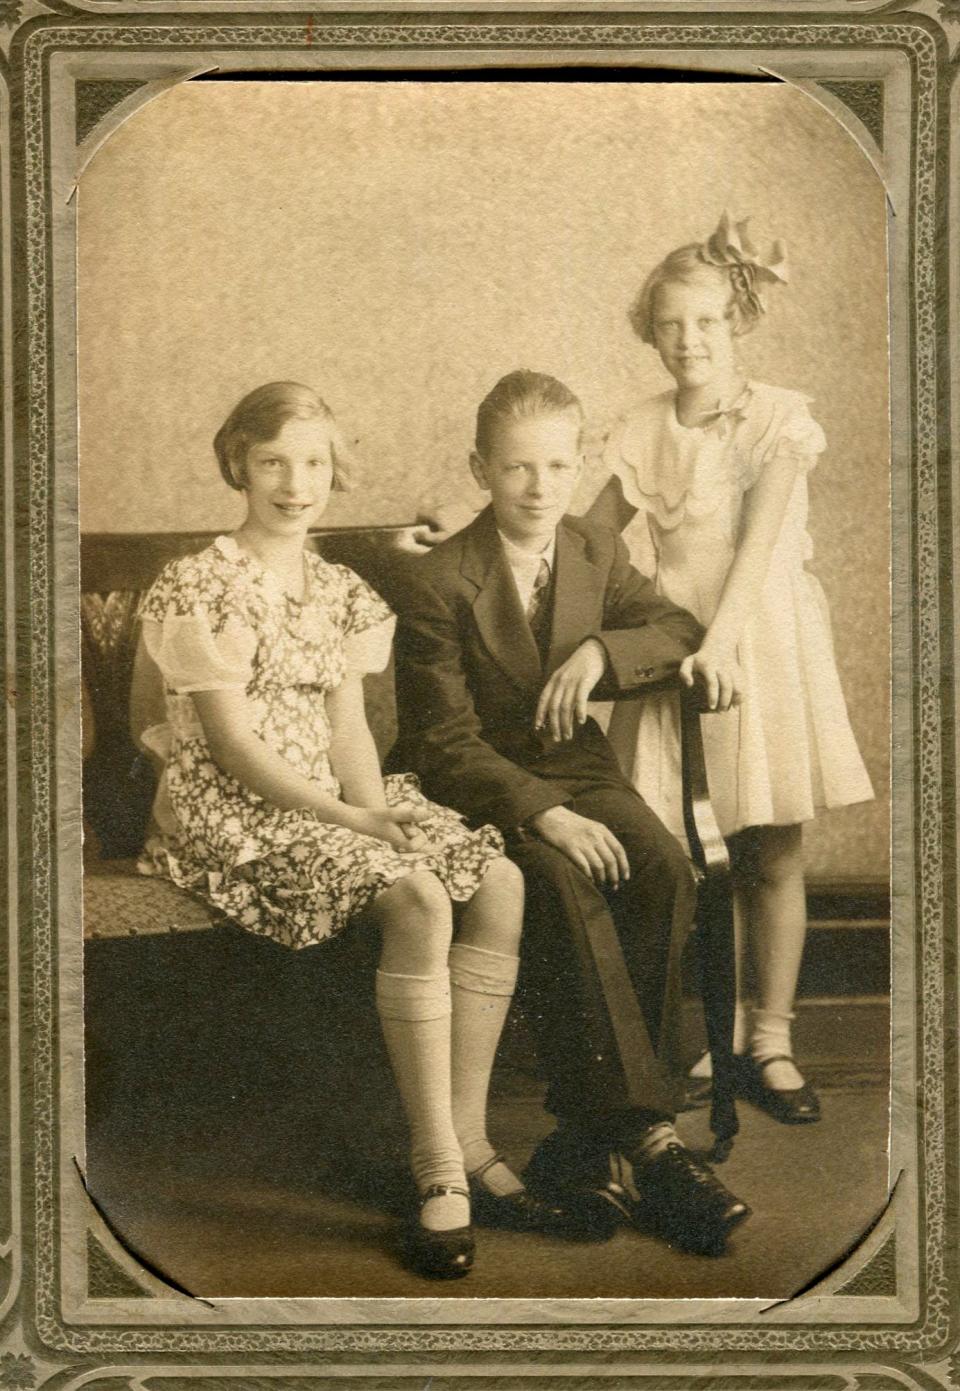 Shirley Patee Meagher was born in 1923 in a farmhouse near Peoria. Shirley and her older brother, Bob, and younger sister, Lauralee, are pictured in this old family photo.